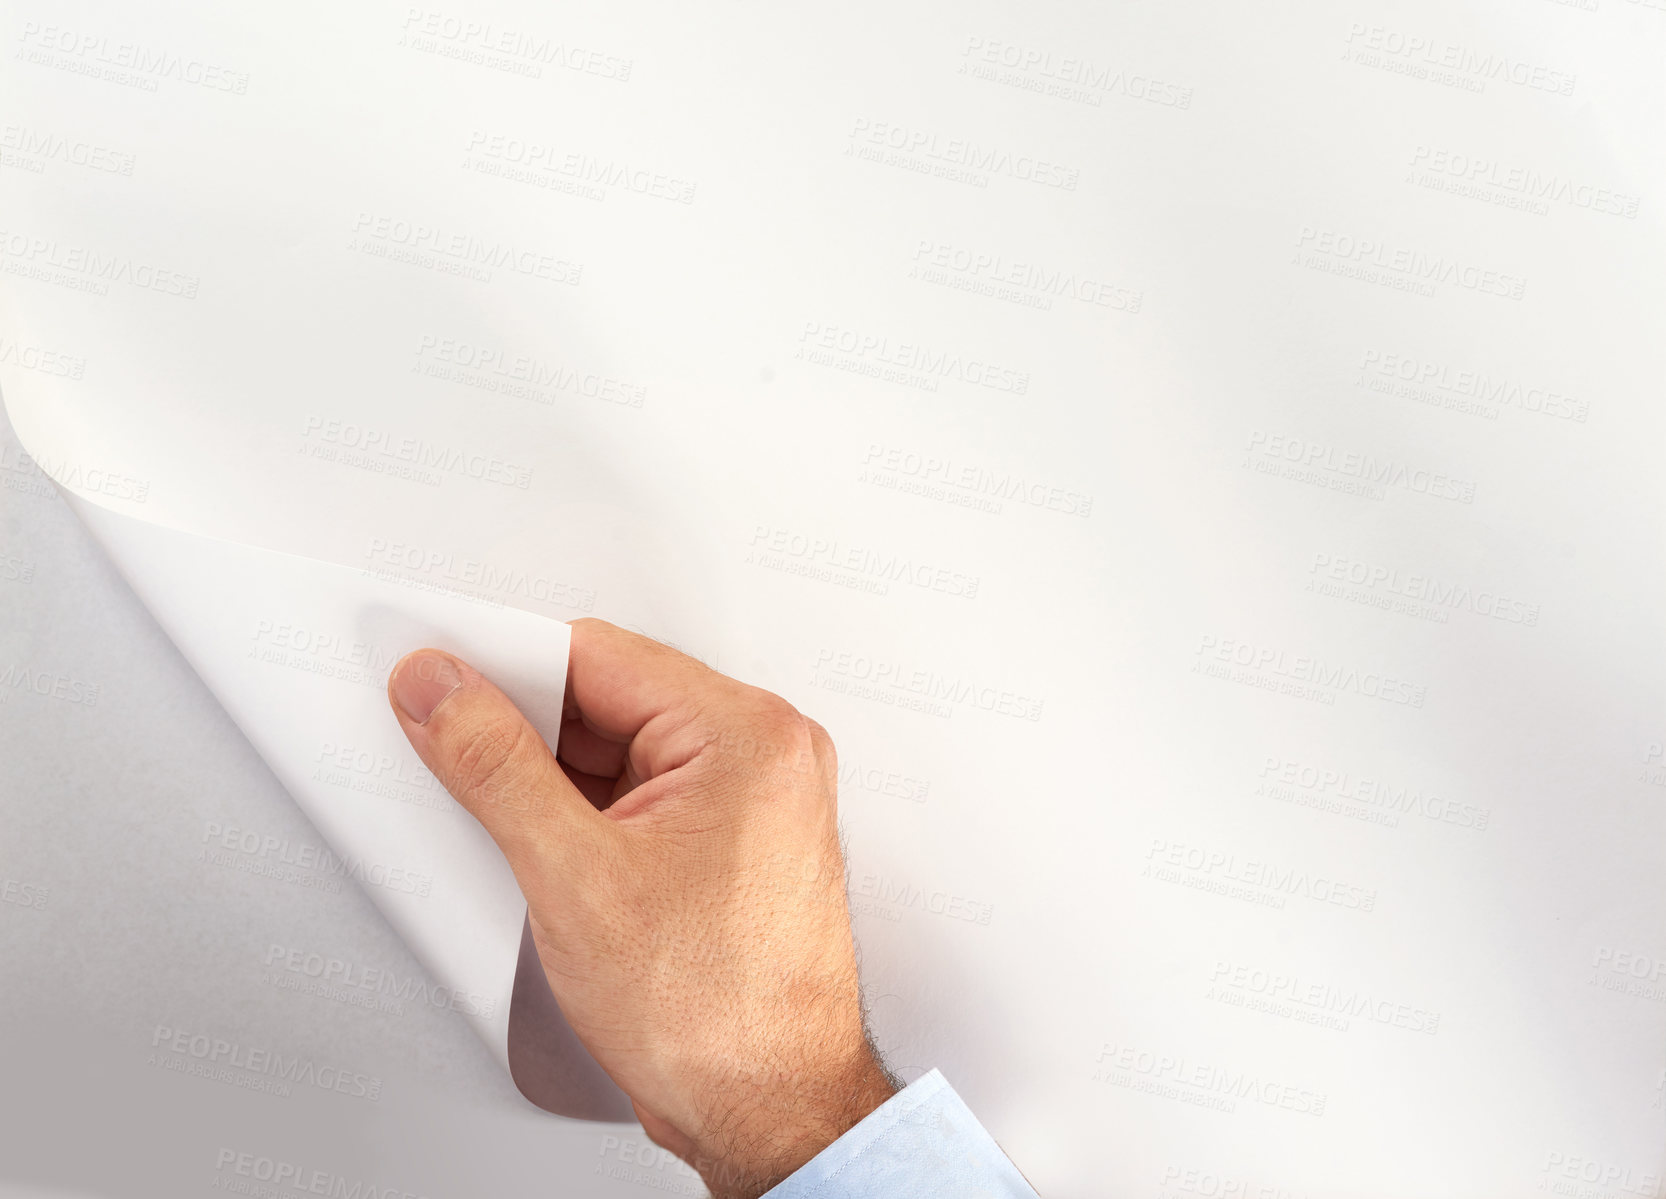 Buy stock photo Cropped shot of an unidentifiable person turning a blank page of copyspace